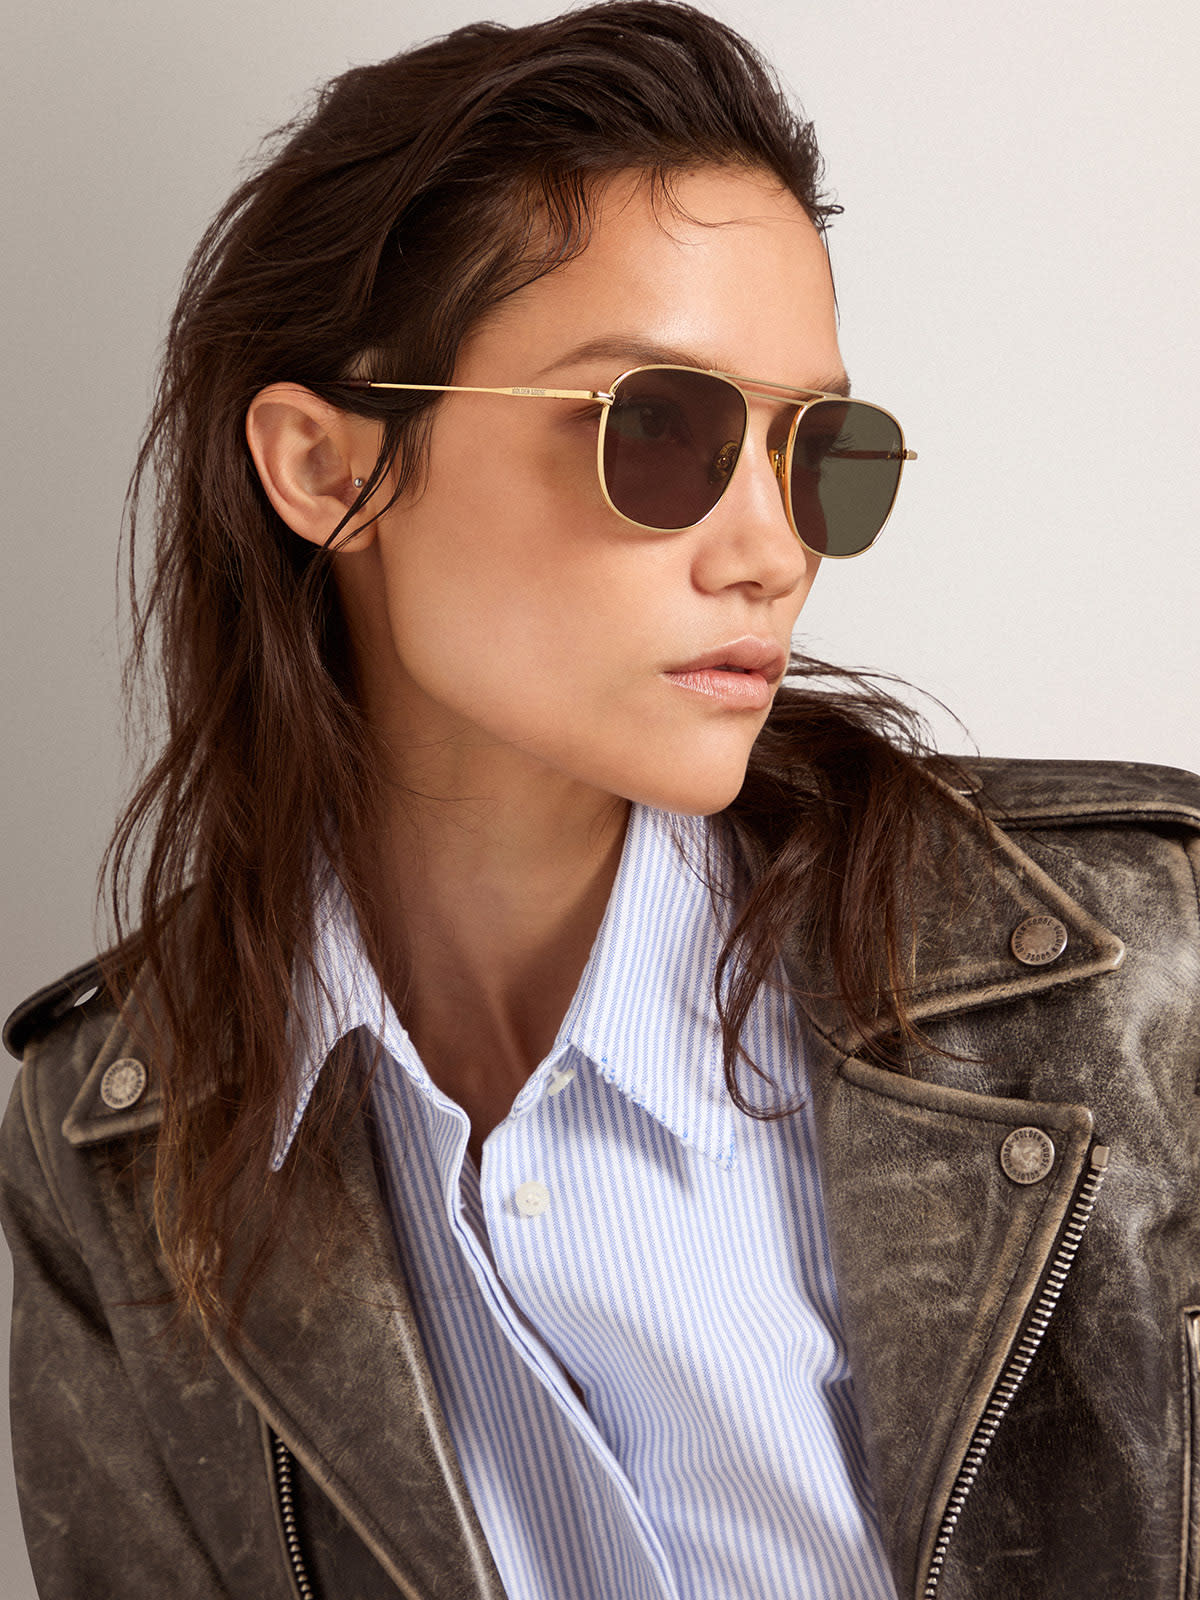 Golden Goose - Aviator sunglasses with gold frame and green lenses in 